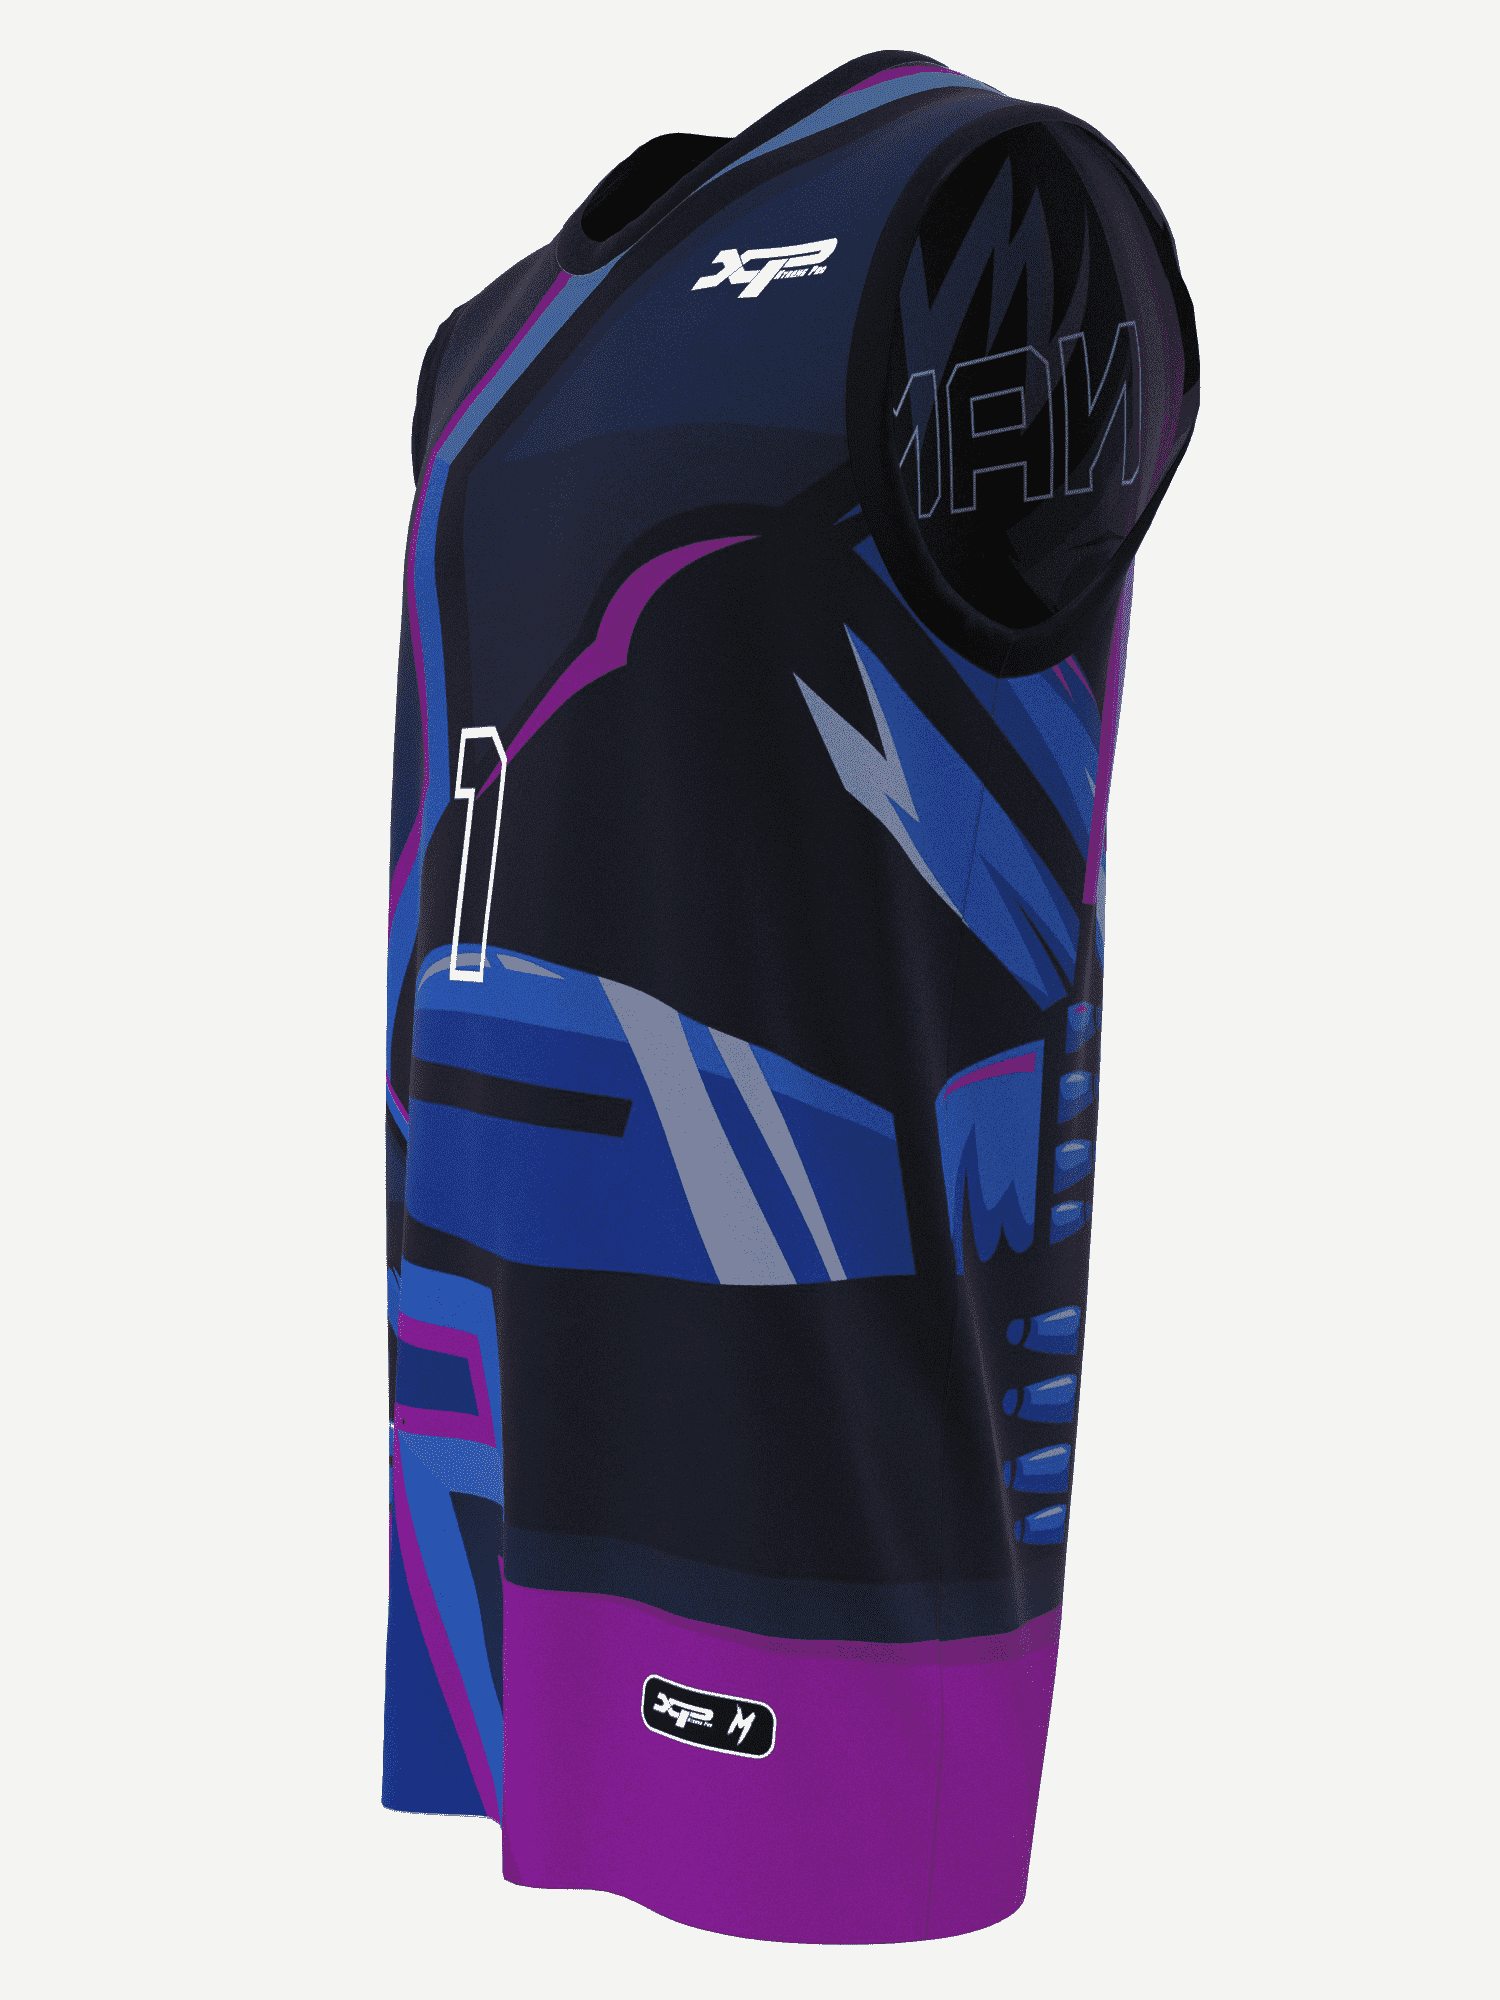 Cyber Warrior Jersey Xtreme Pro Apparel